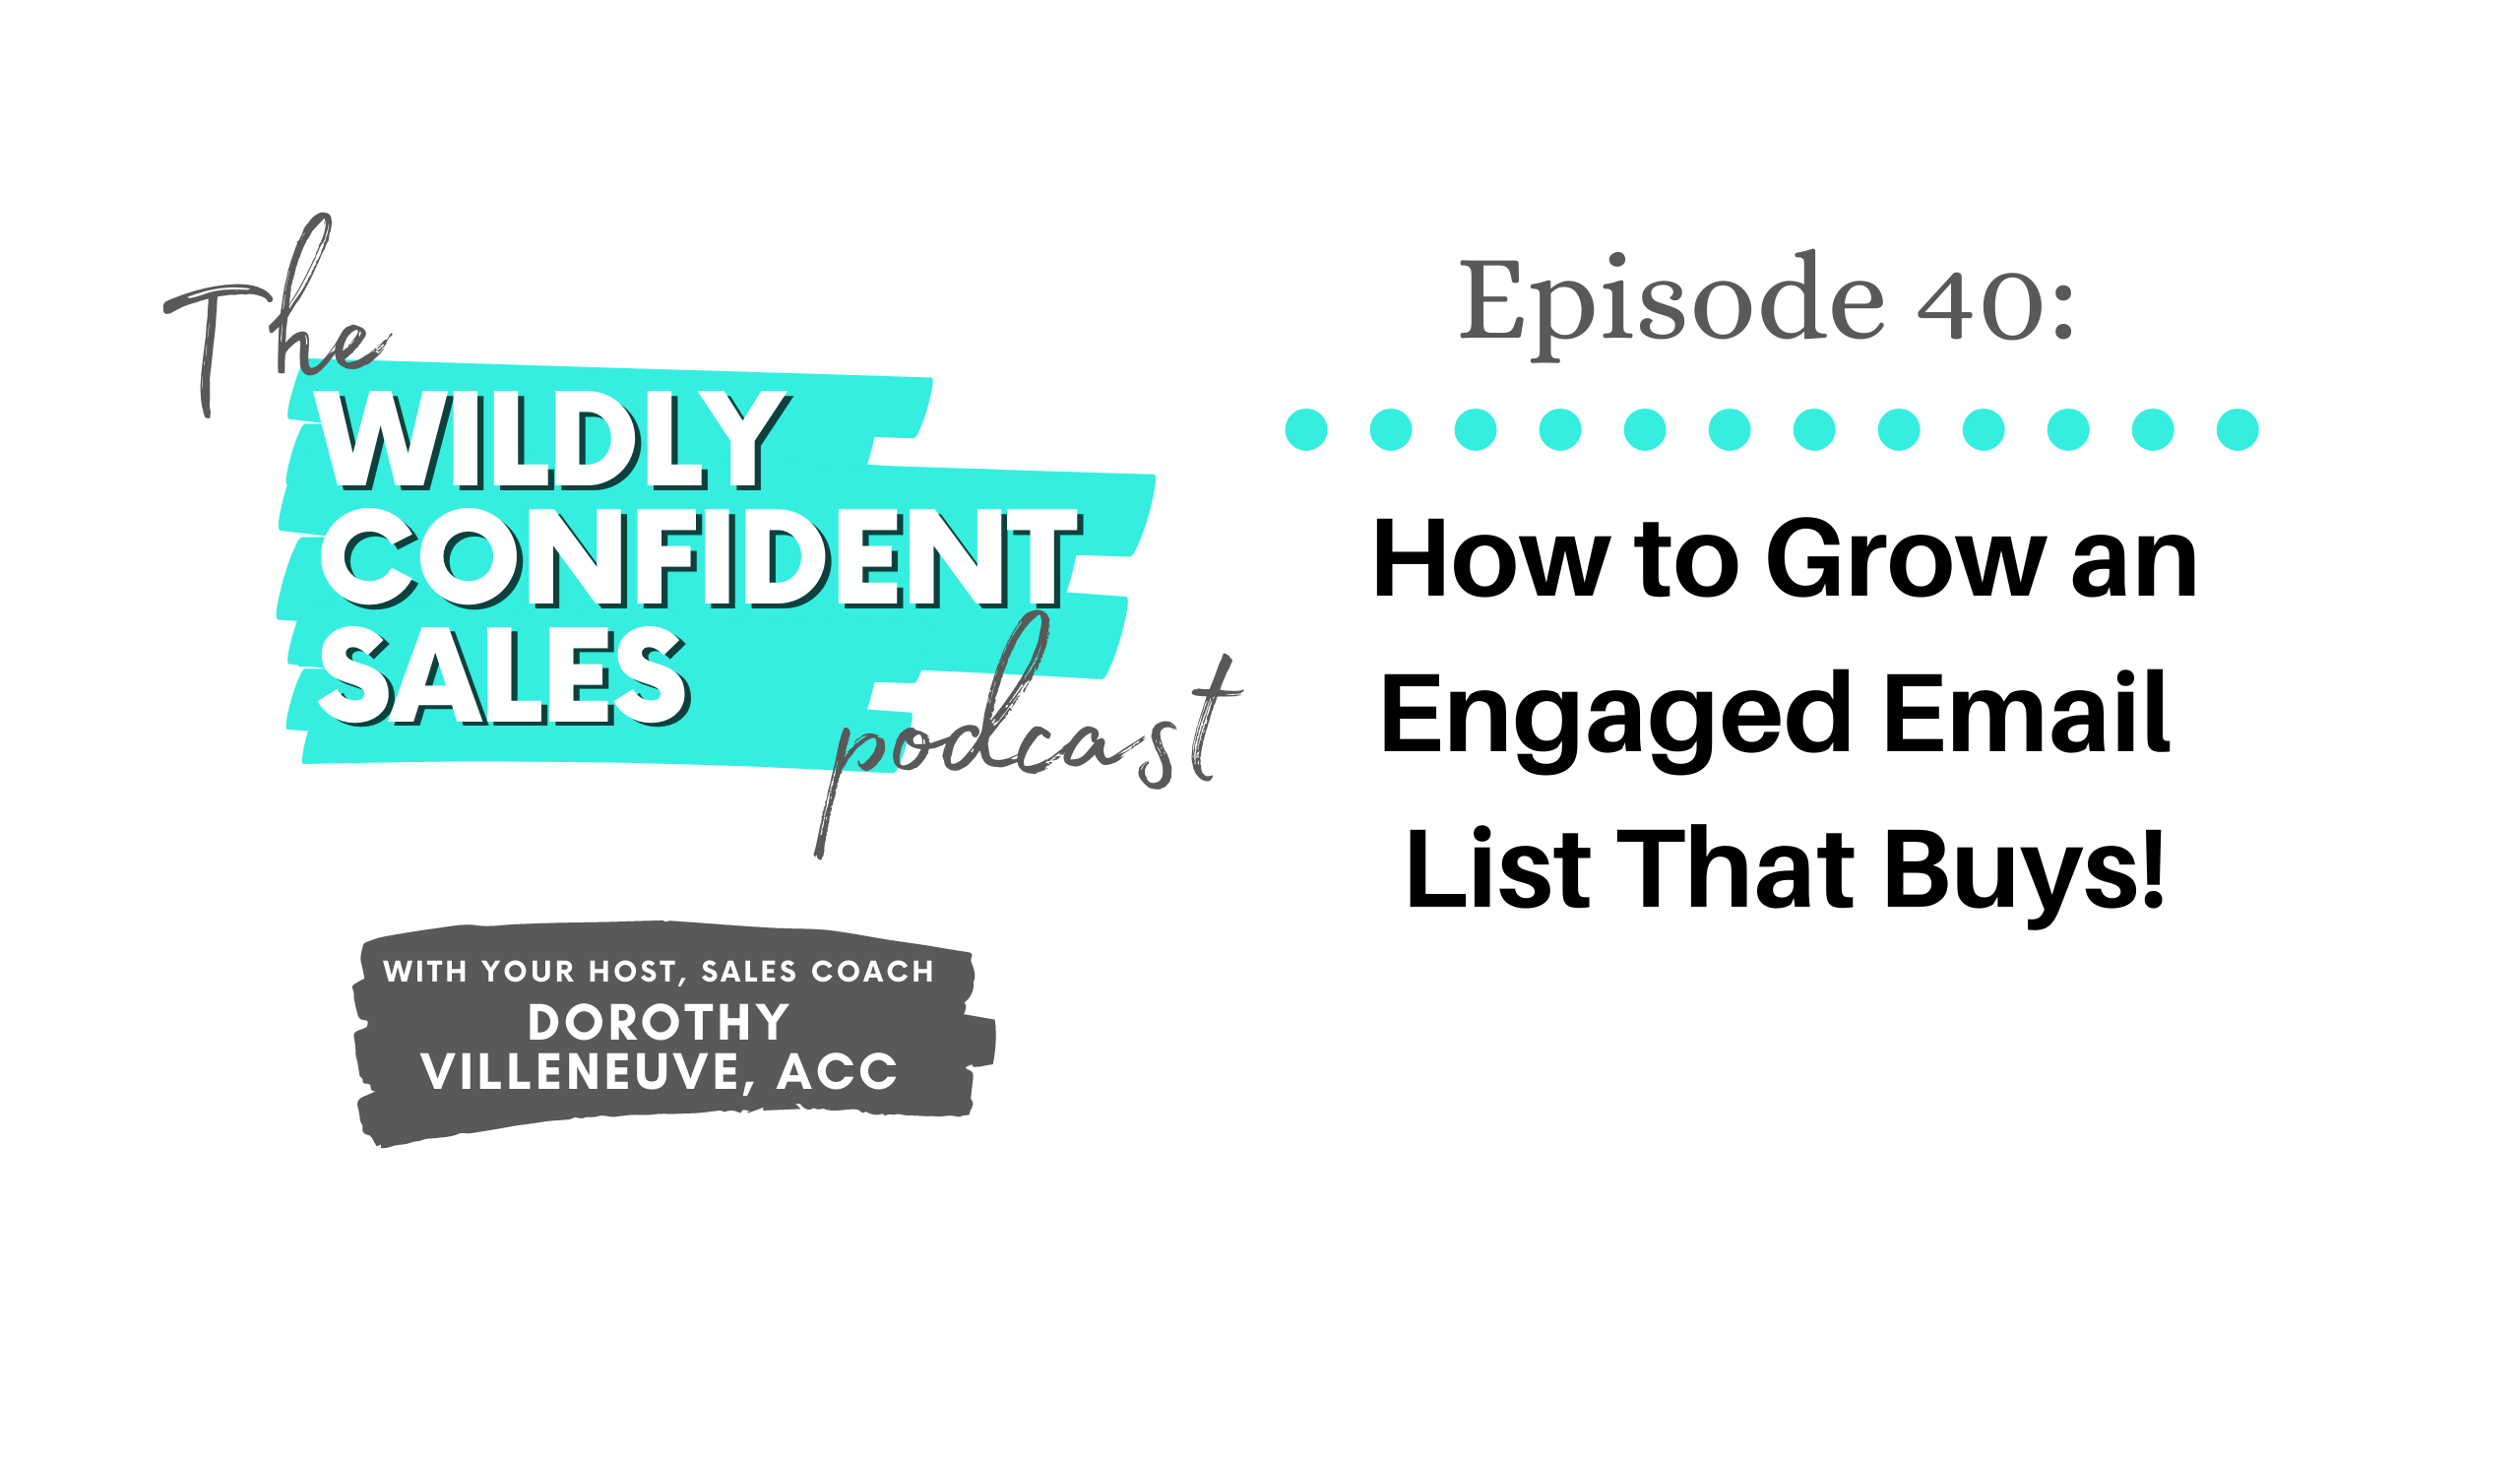 How to Grow an Engaged Email List that Buys